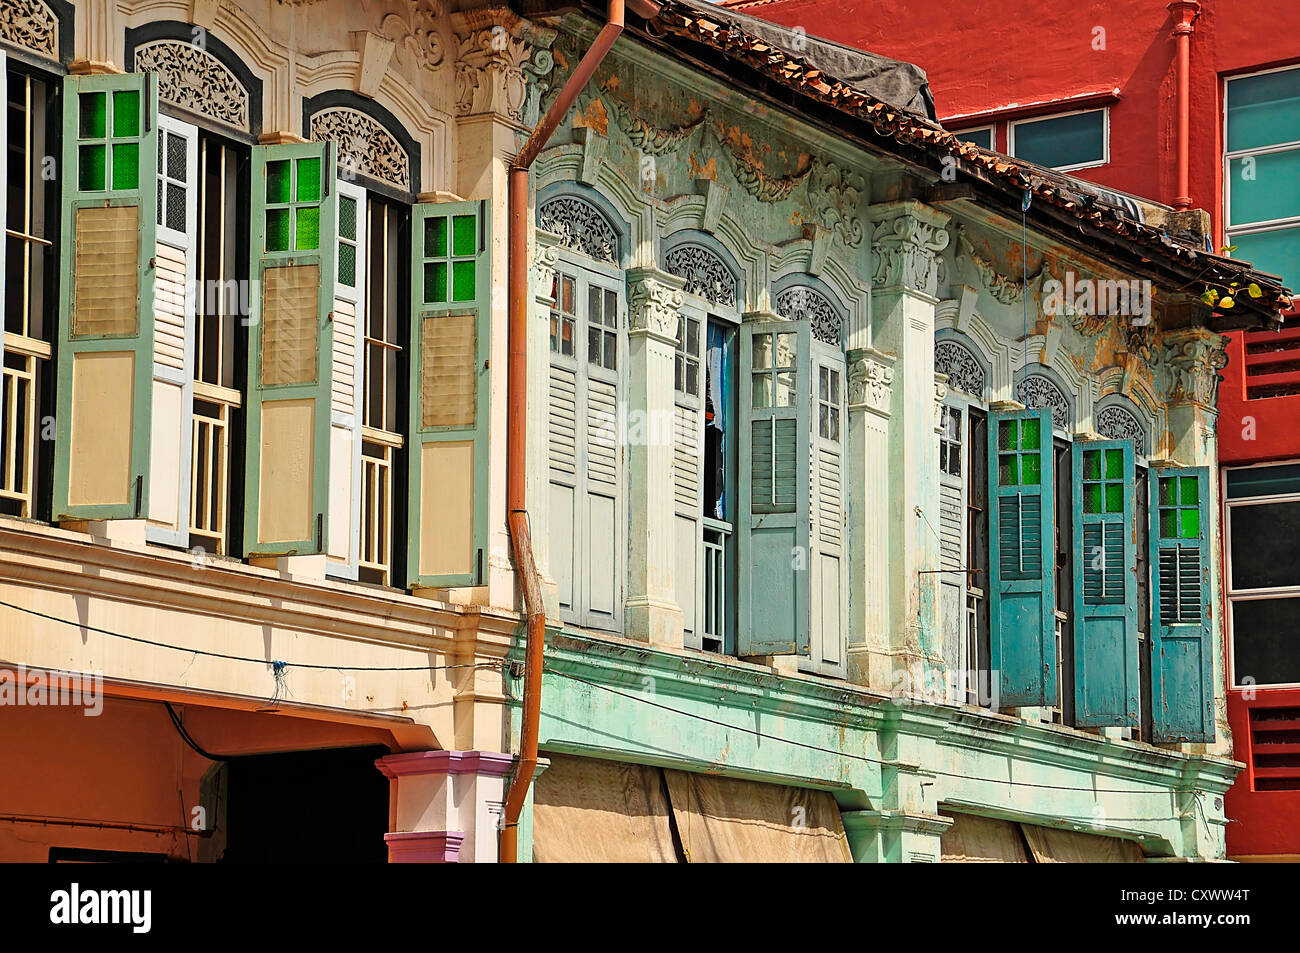 Colored wooden colonial style house in Arab Street - Singapore Stock Photo